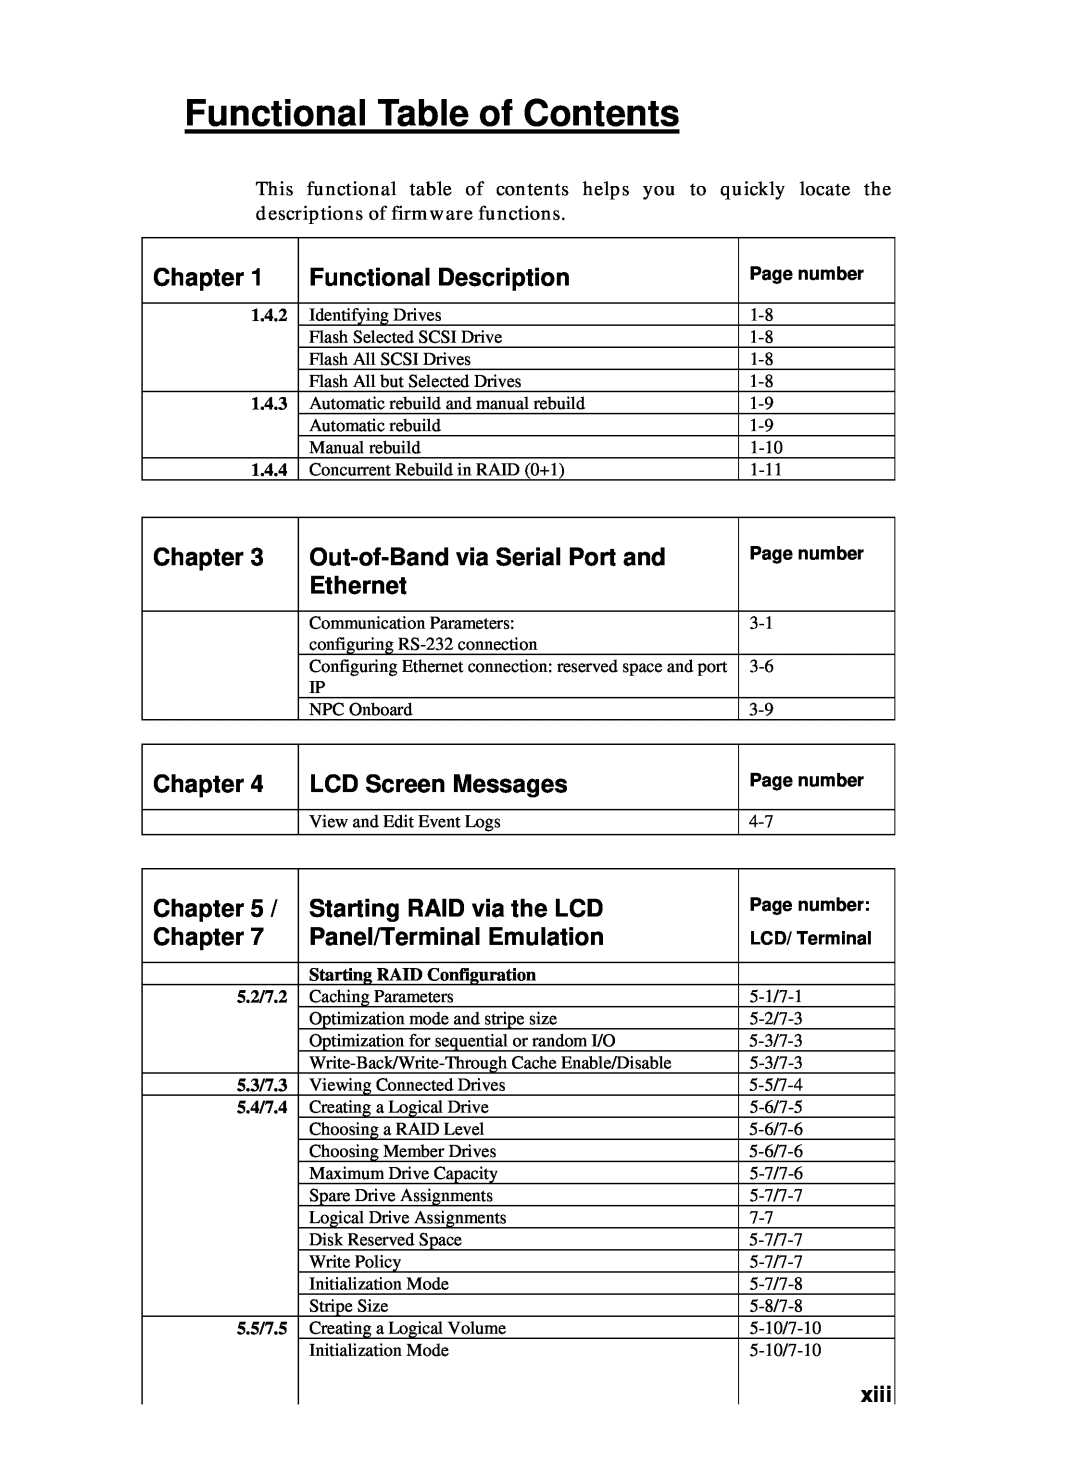 Compaq Infortrend Functional Table of Contents, Chapter, Functional Description, Out-of-Band via Serial Port and, Ethernet 